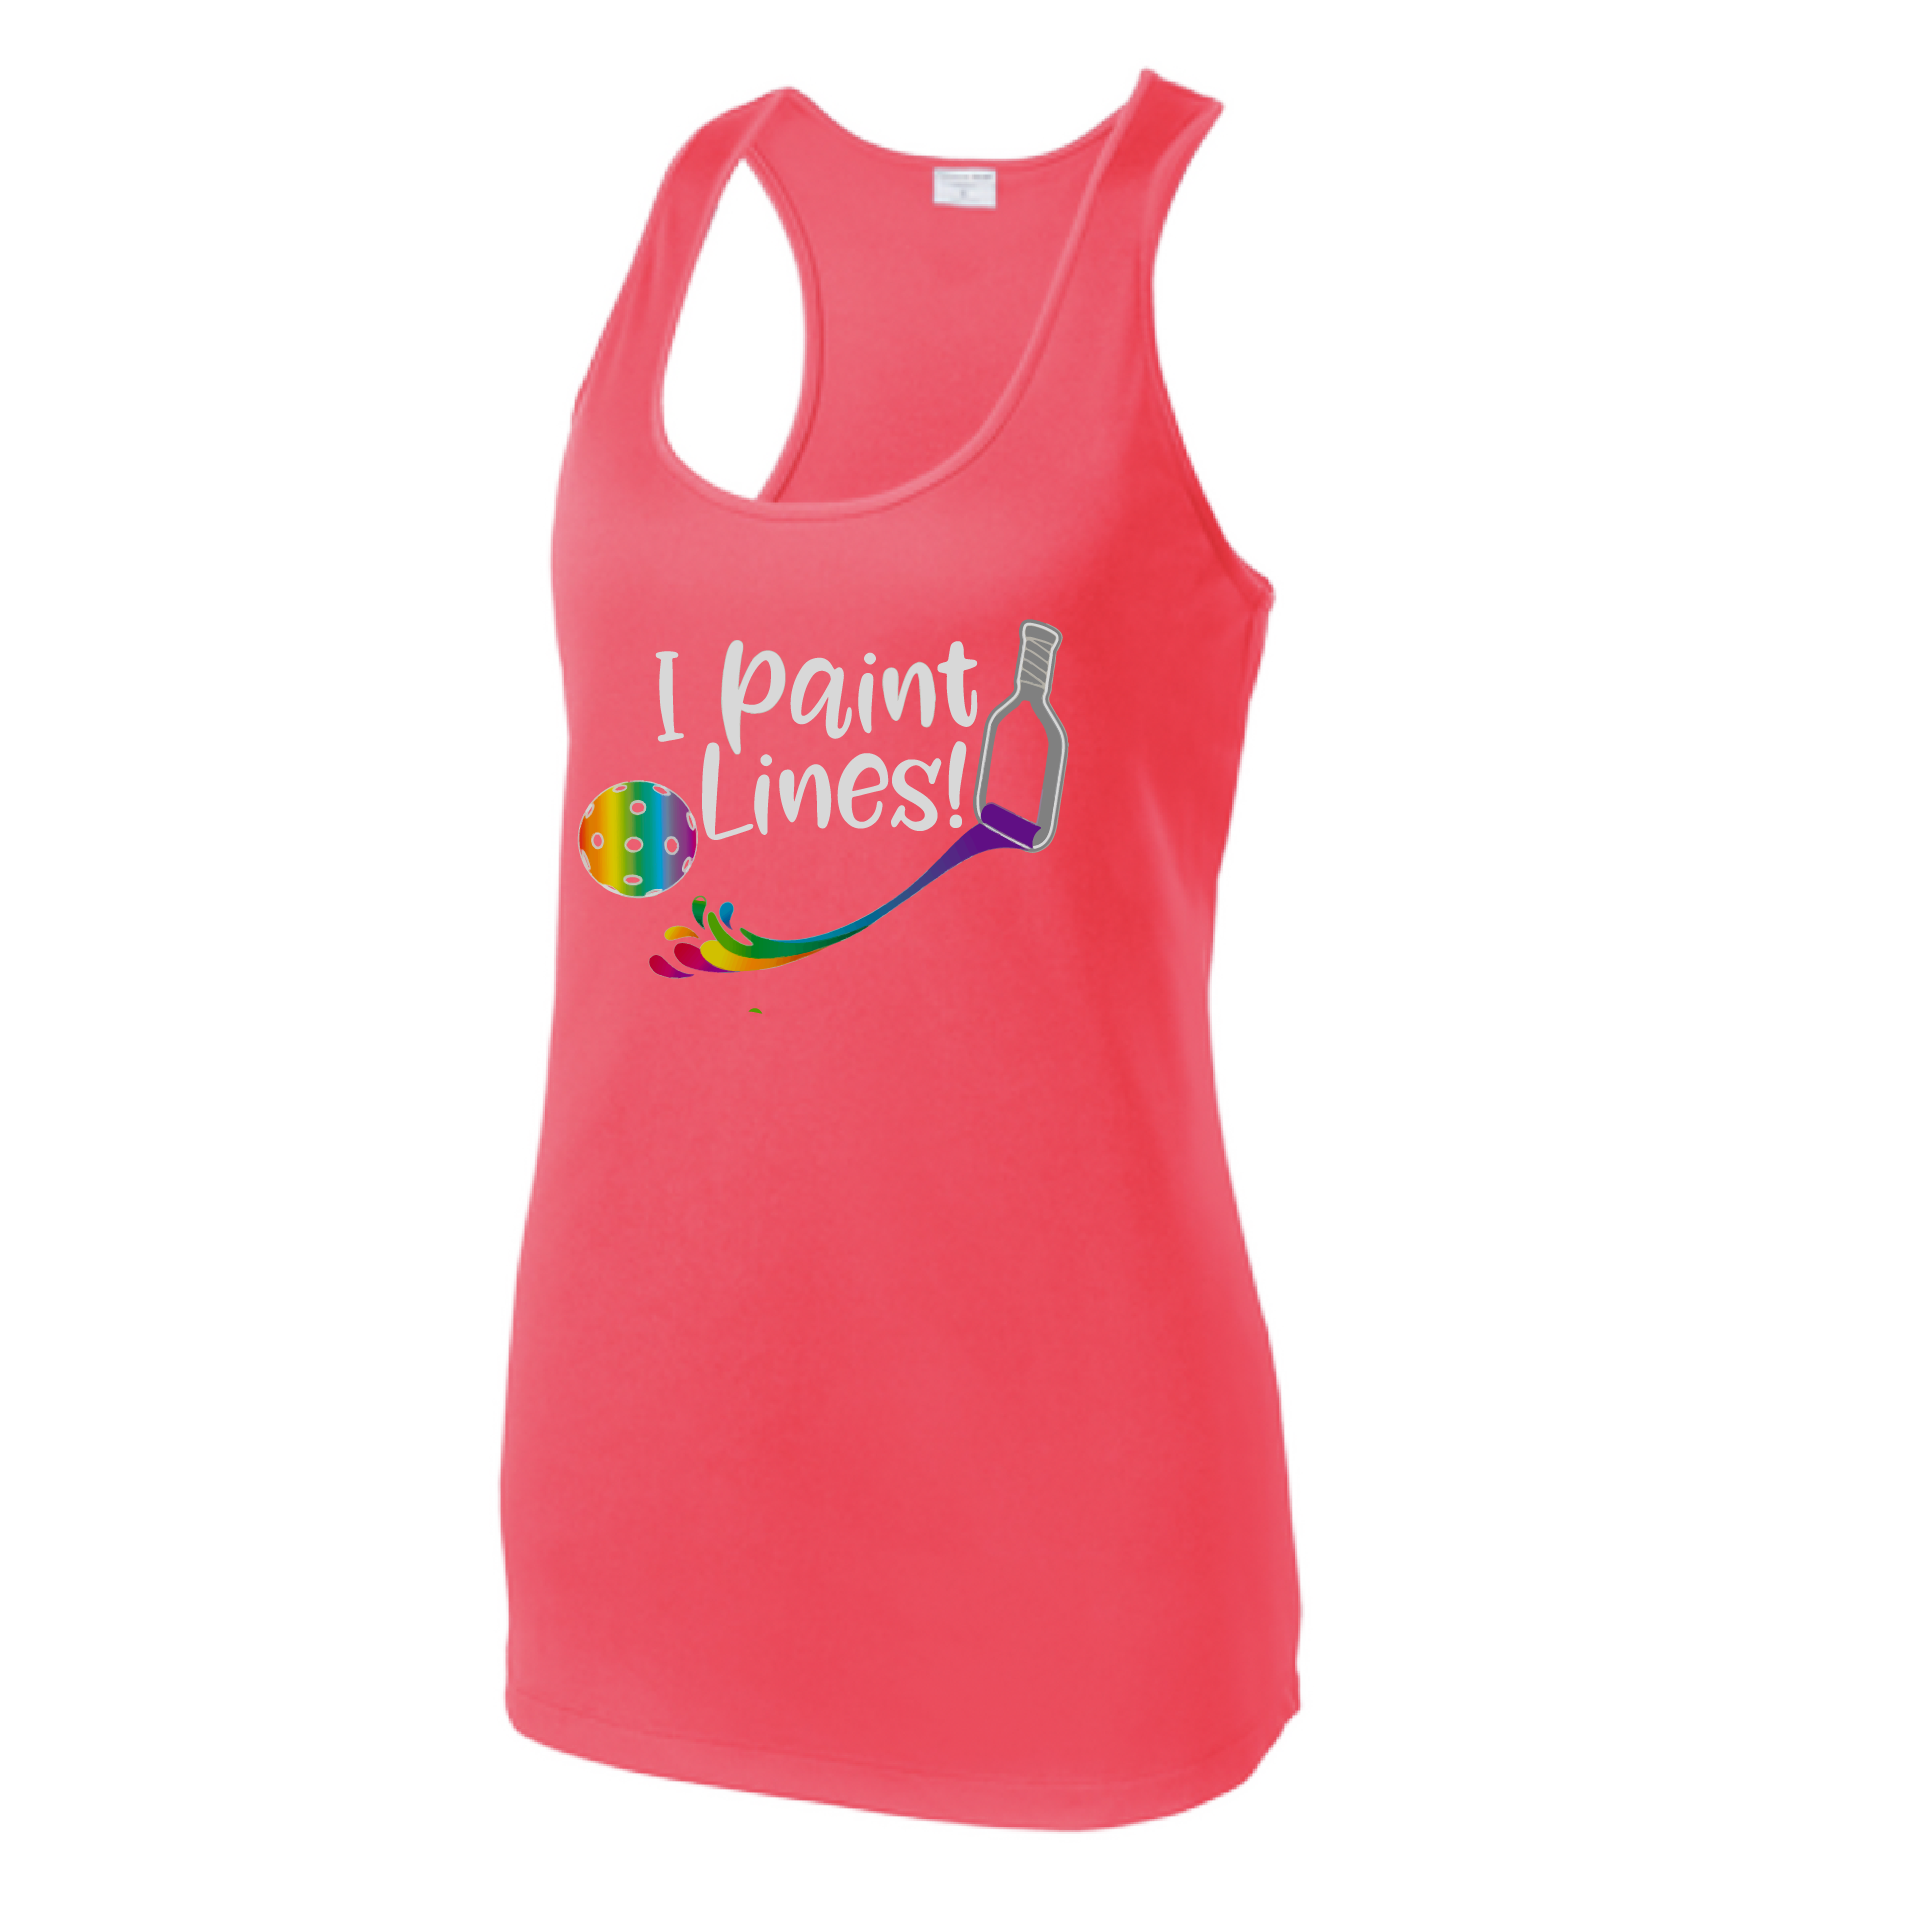 Pickleball Design: I Paint Lines  Women's Styles: Racerback Tank  Turn up the volume in this Women's shirt with its perfect mix of softness and attitude. Material is ultra-comfortable with moisture wicking properties and tri-blend softness. PosiCharge technology locks in color. Highly breathable and lightweight.